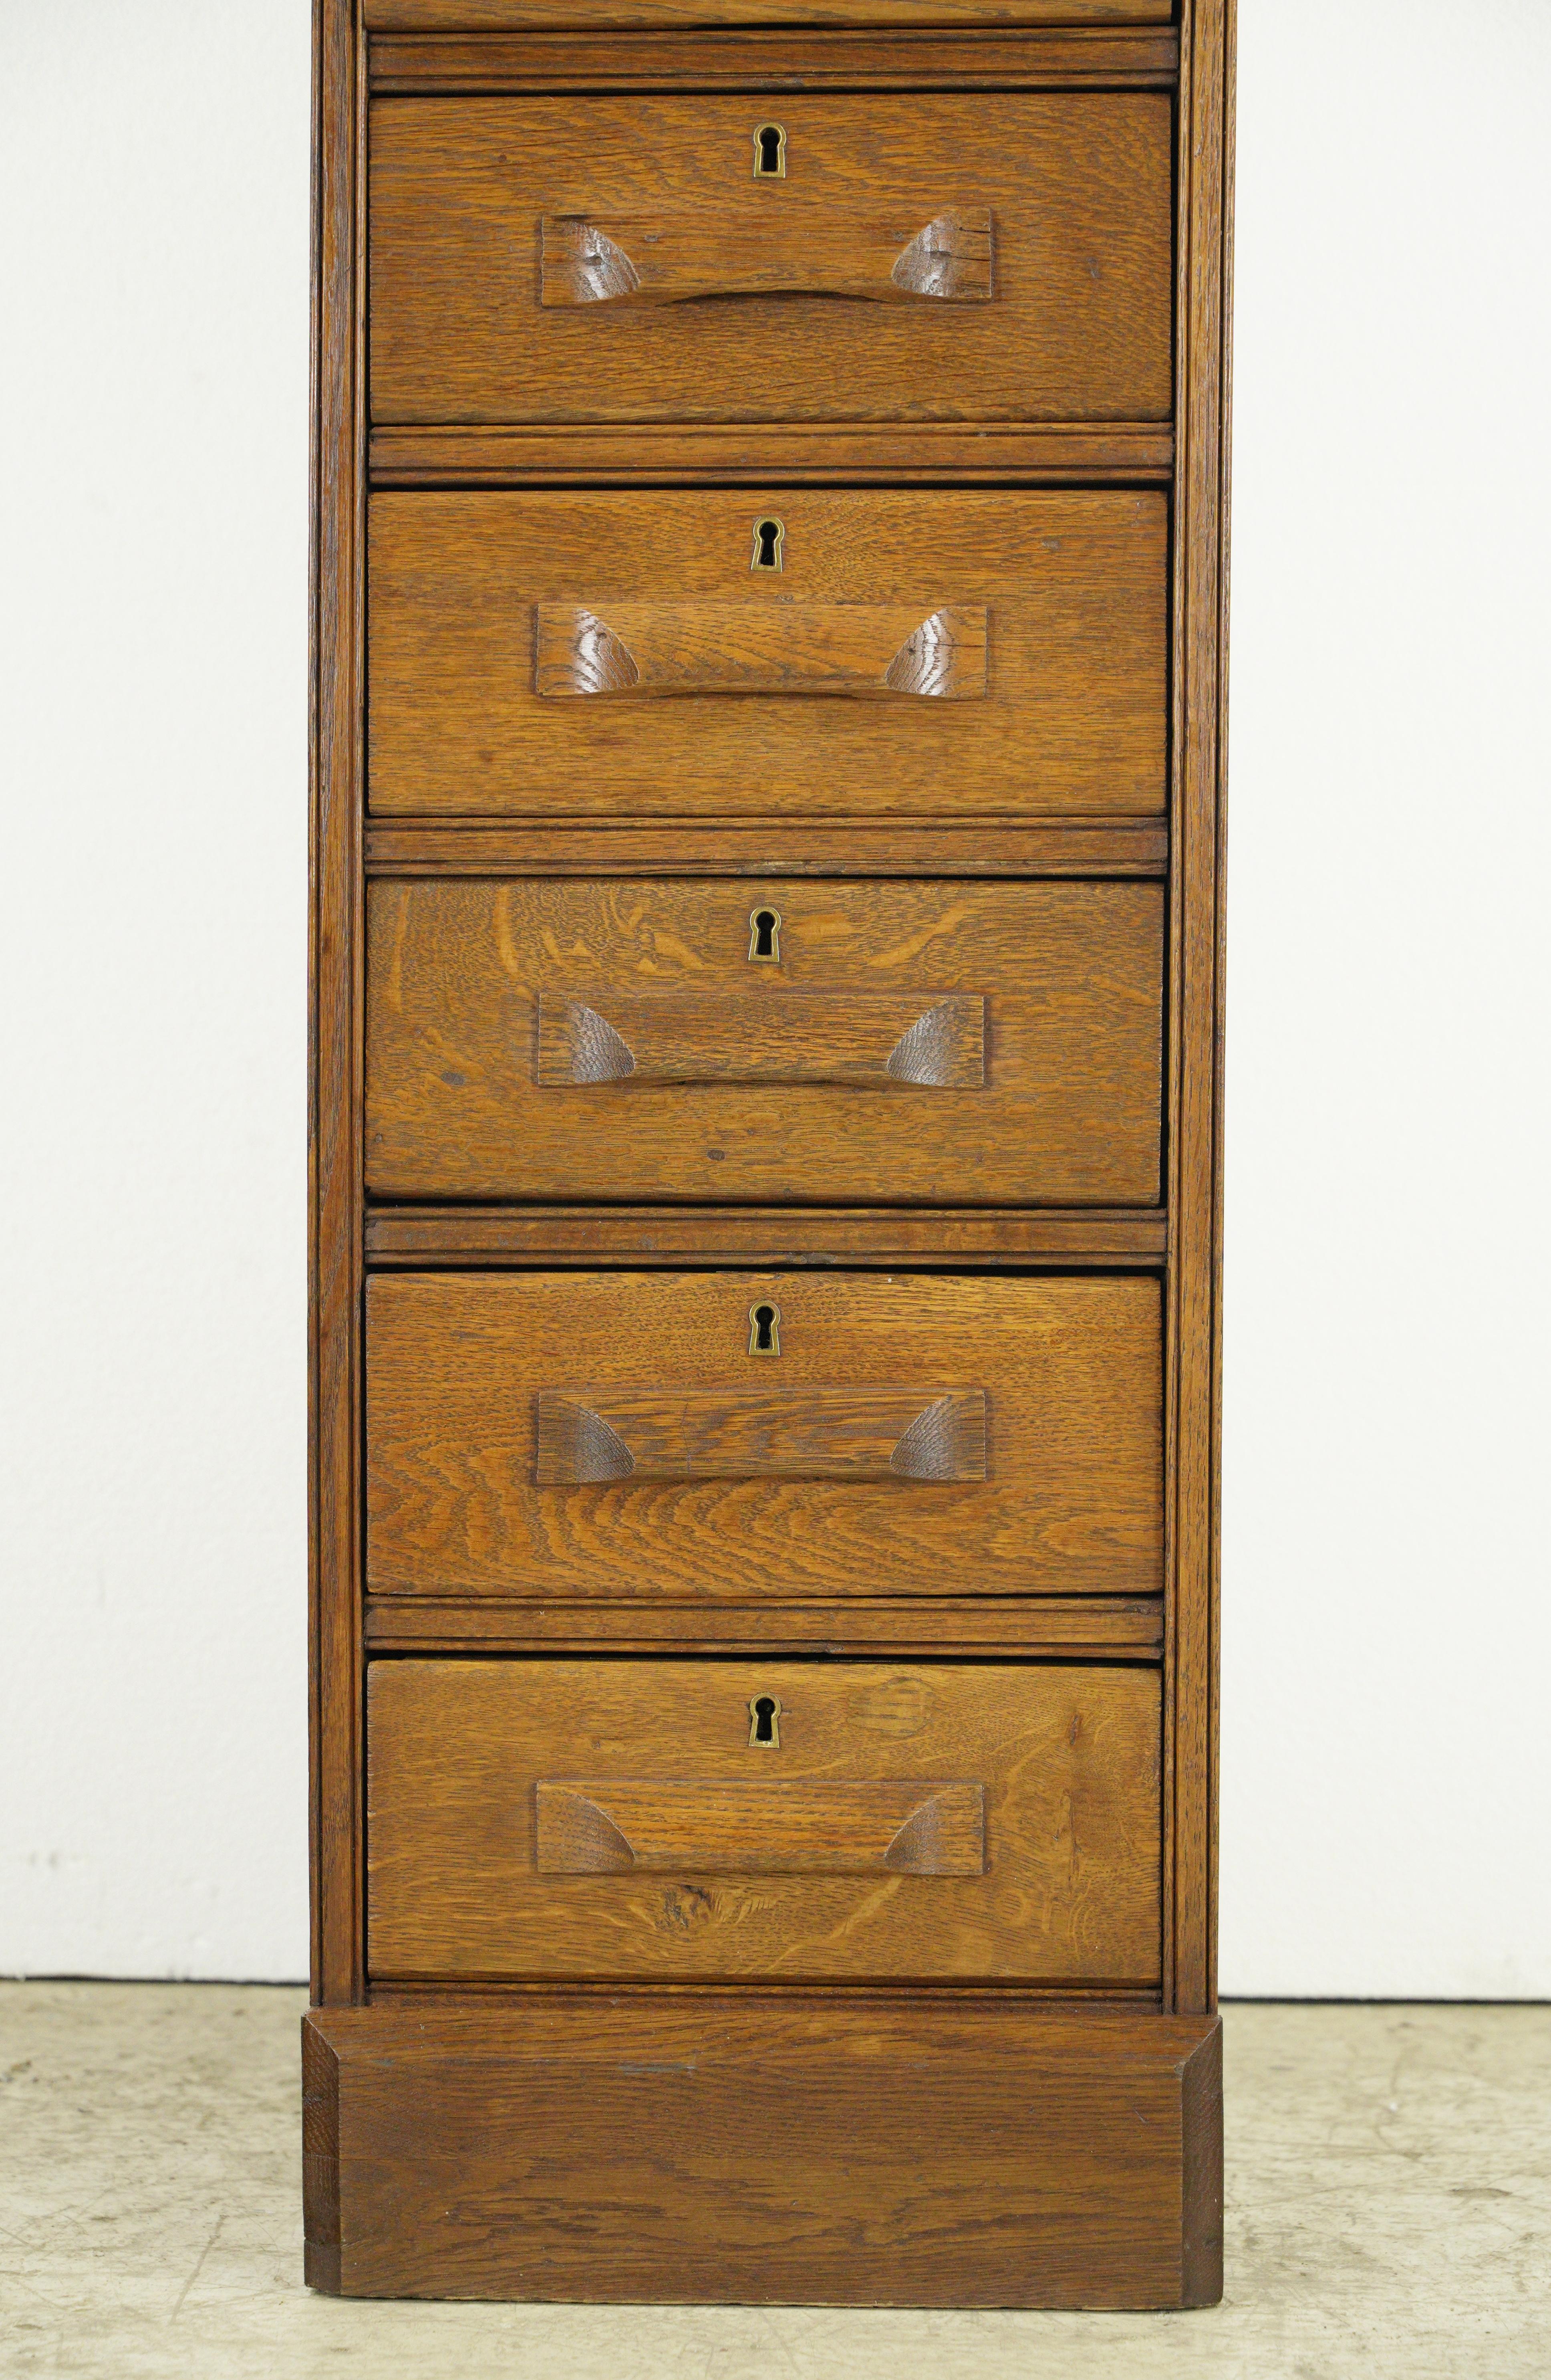 Dark tone oak filing cabinet with eight drawers with wooden pulls and brass keyhole hardware. Good condition with appropriate wear from age, with a minor split in the top. One available. Please note, this item is located in one of our NYC locations.